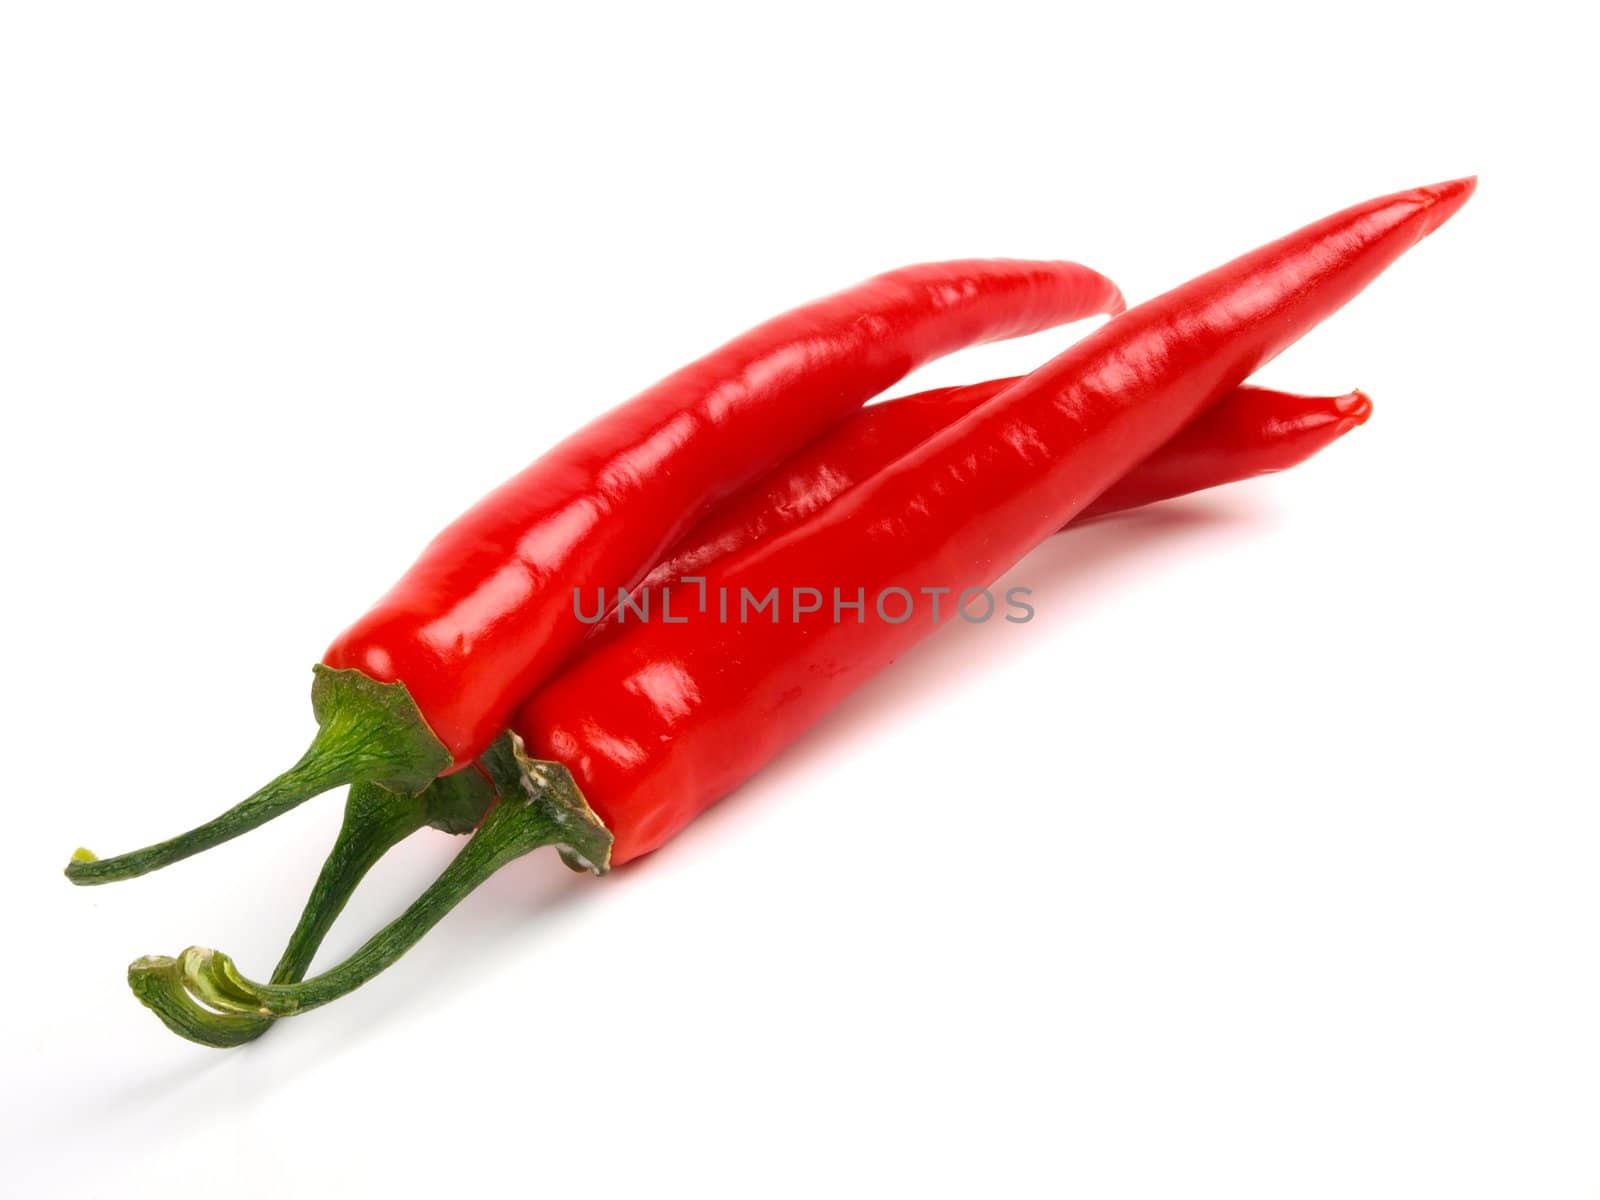 Red chili pepper. Close up. White background  by dotweb